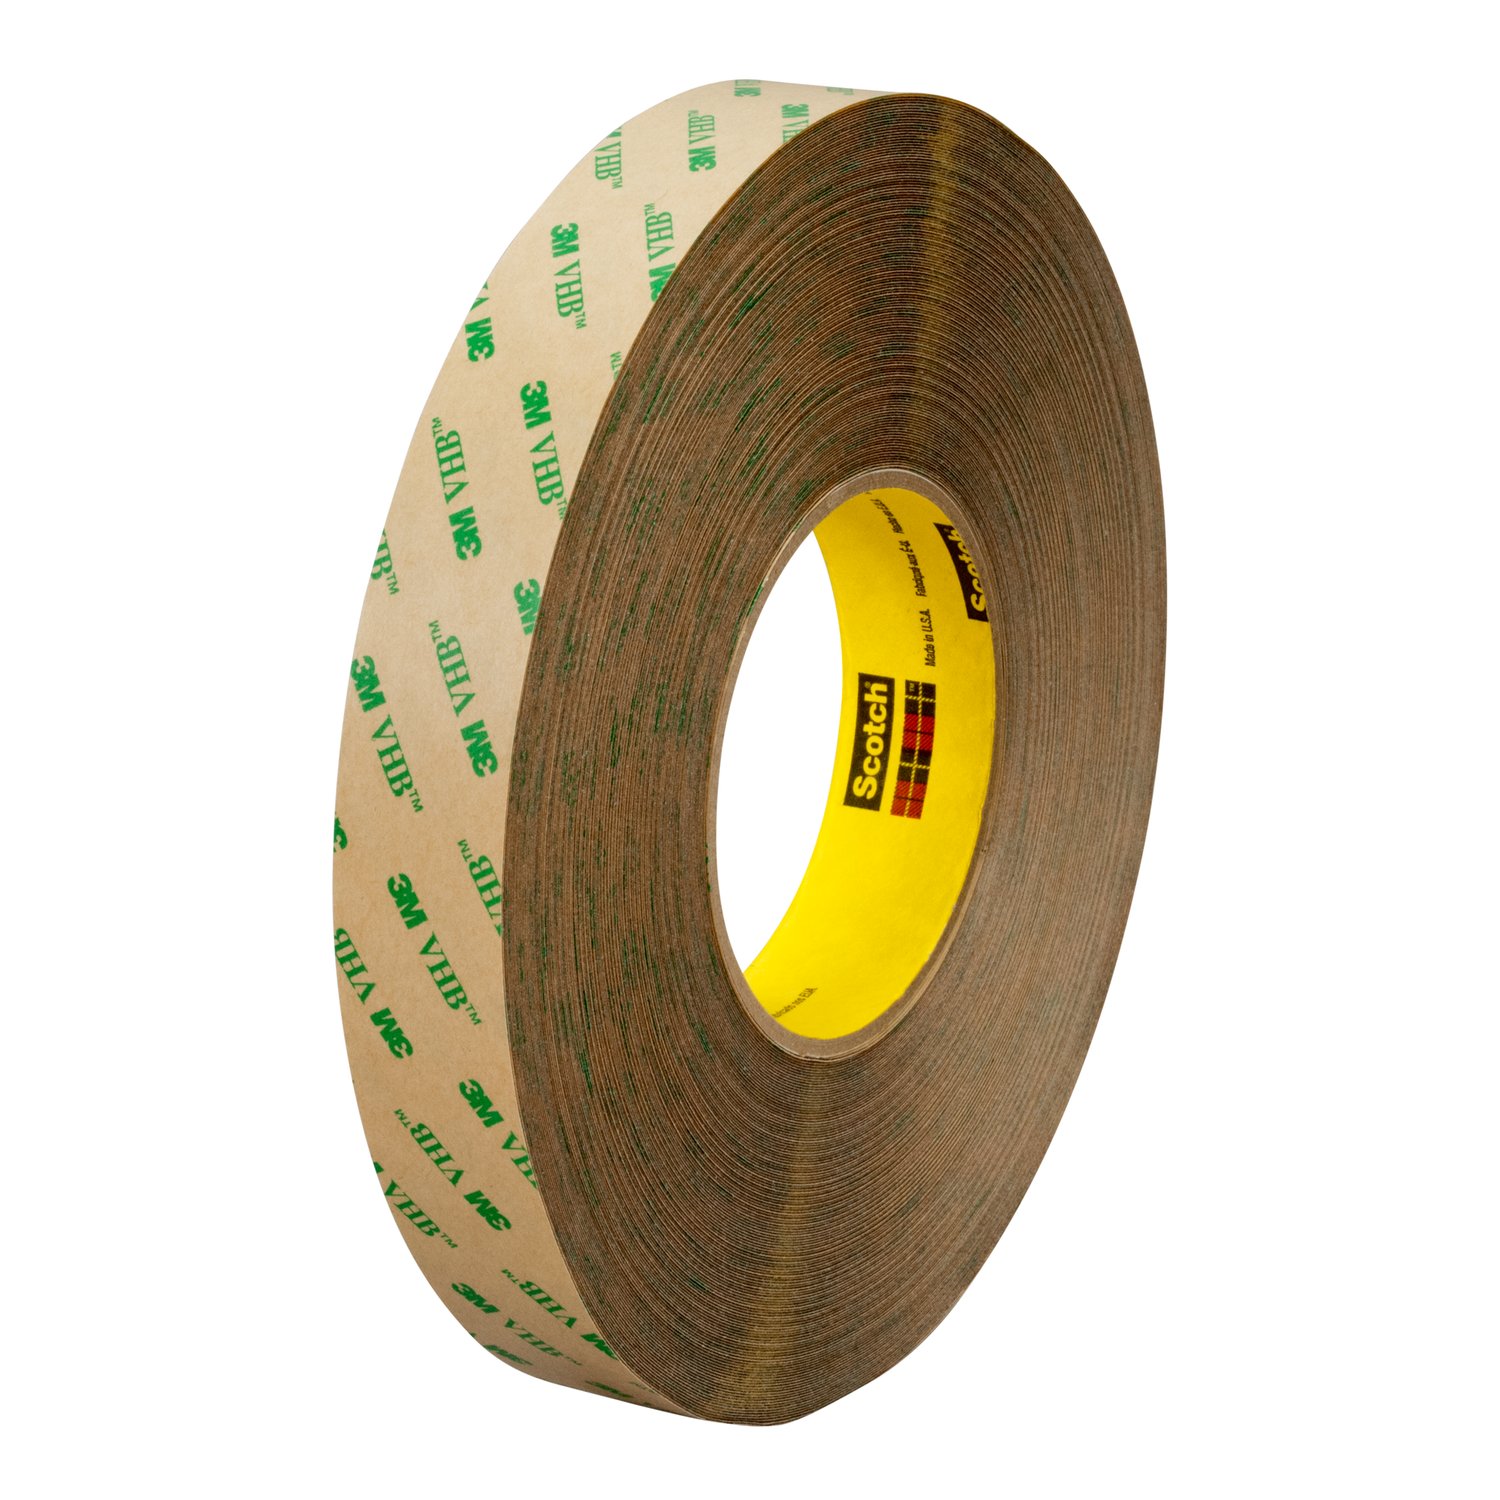 7010334397 - 3M Adhesive Transfer Tape 9473PC, Clear, 12 in x 60 yd, 10 mil, 1 roll
per case